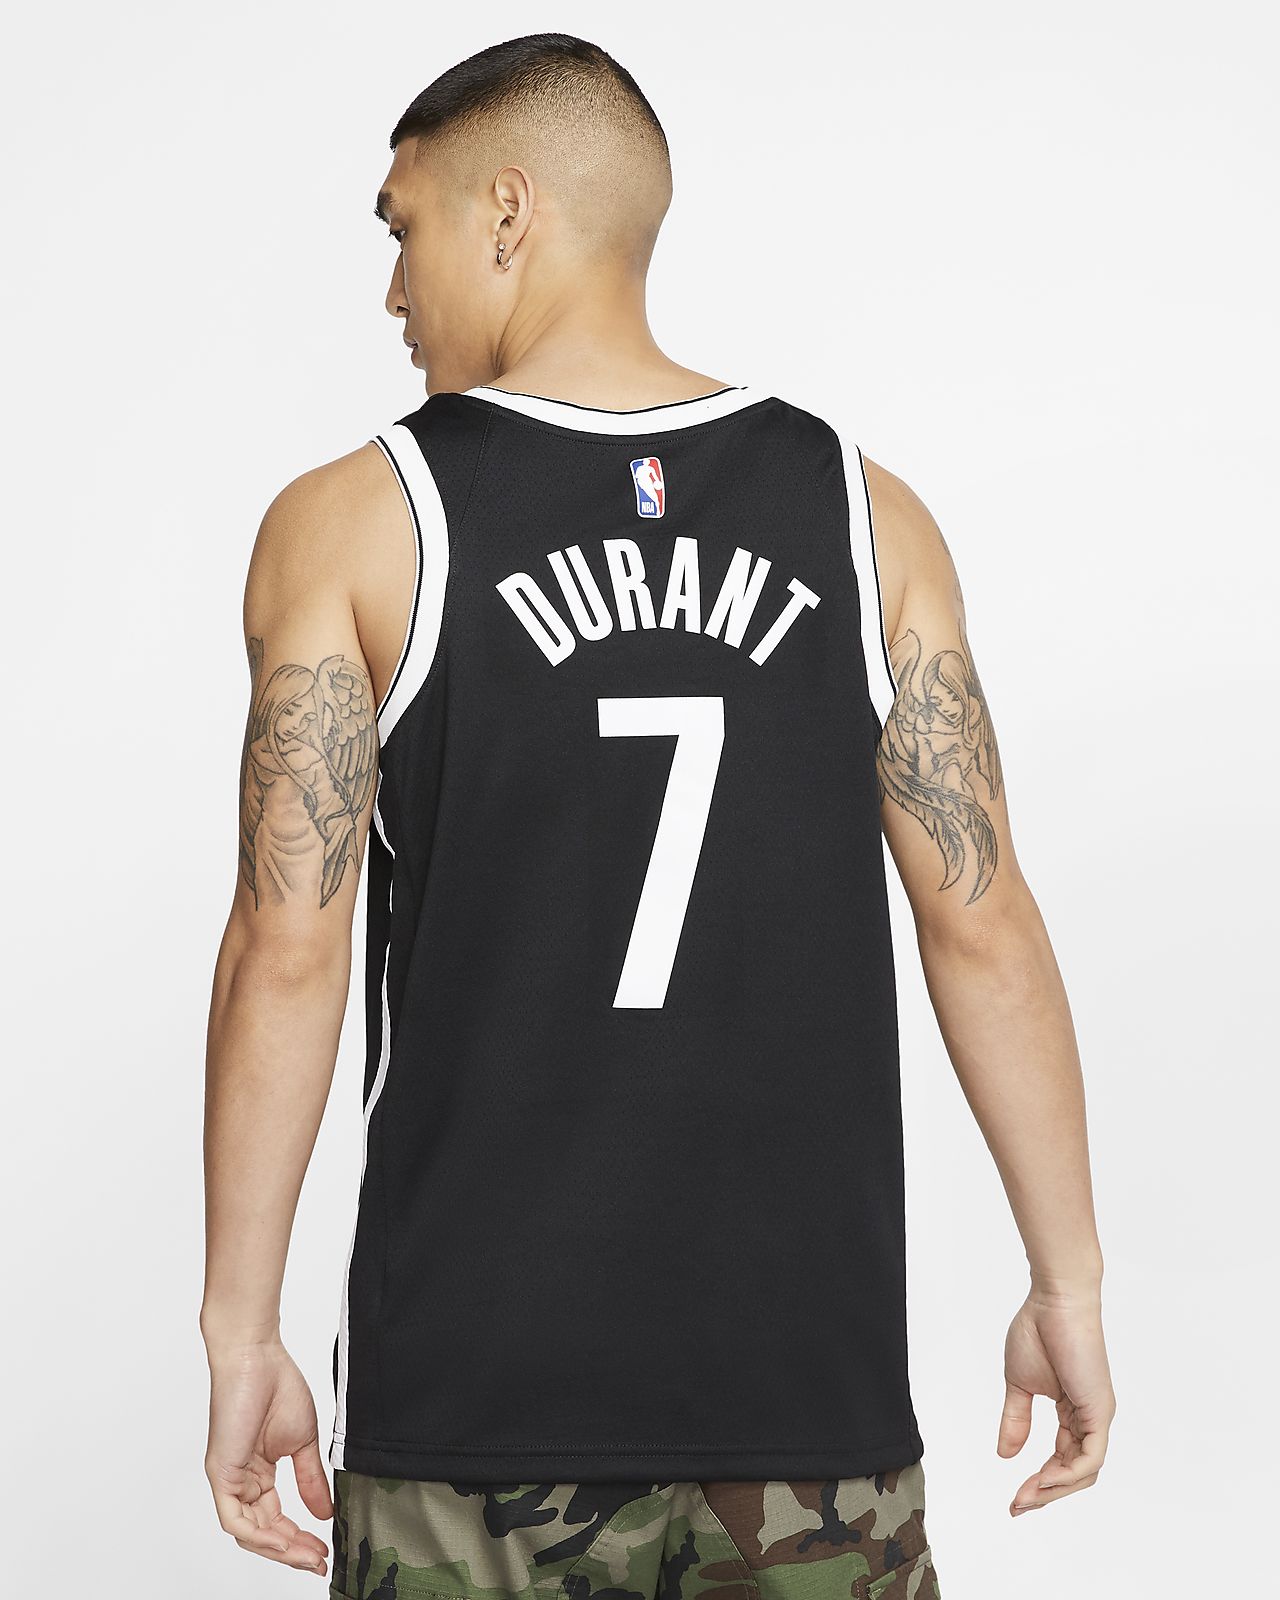 kevin durant in a nets jersey